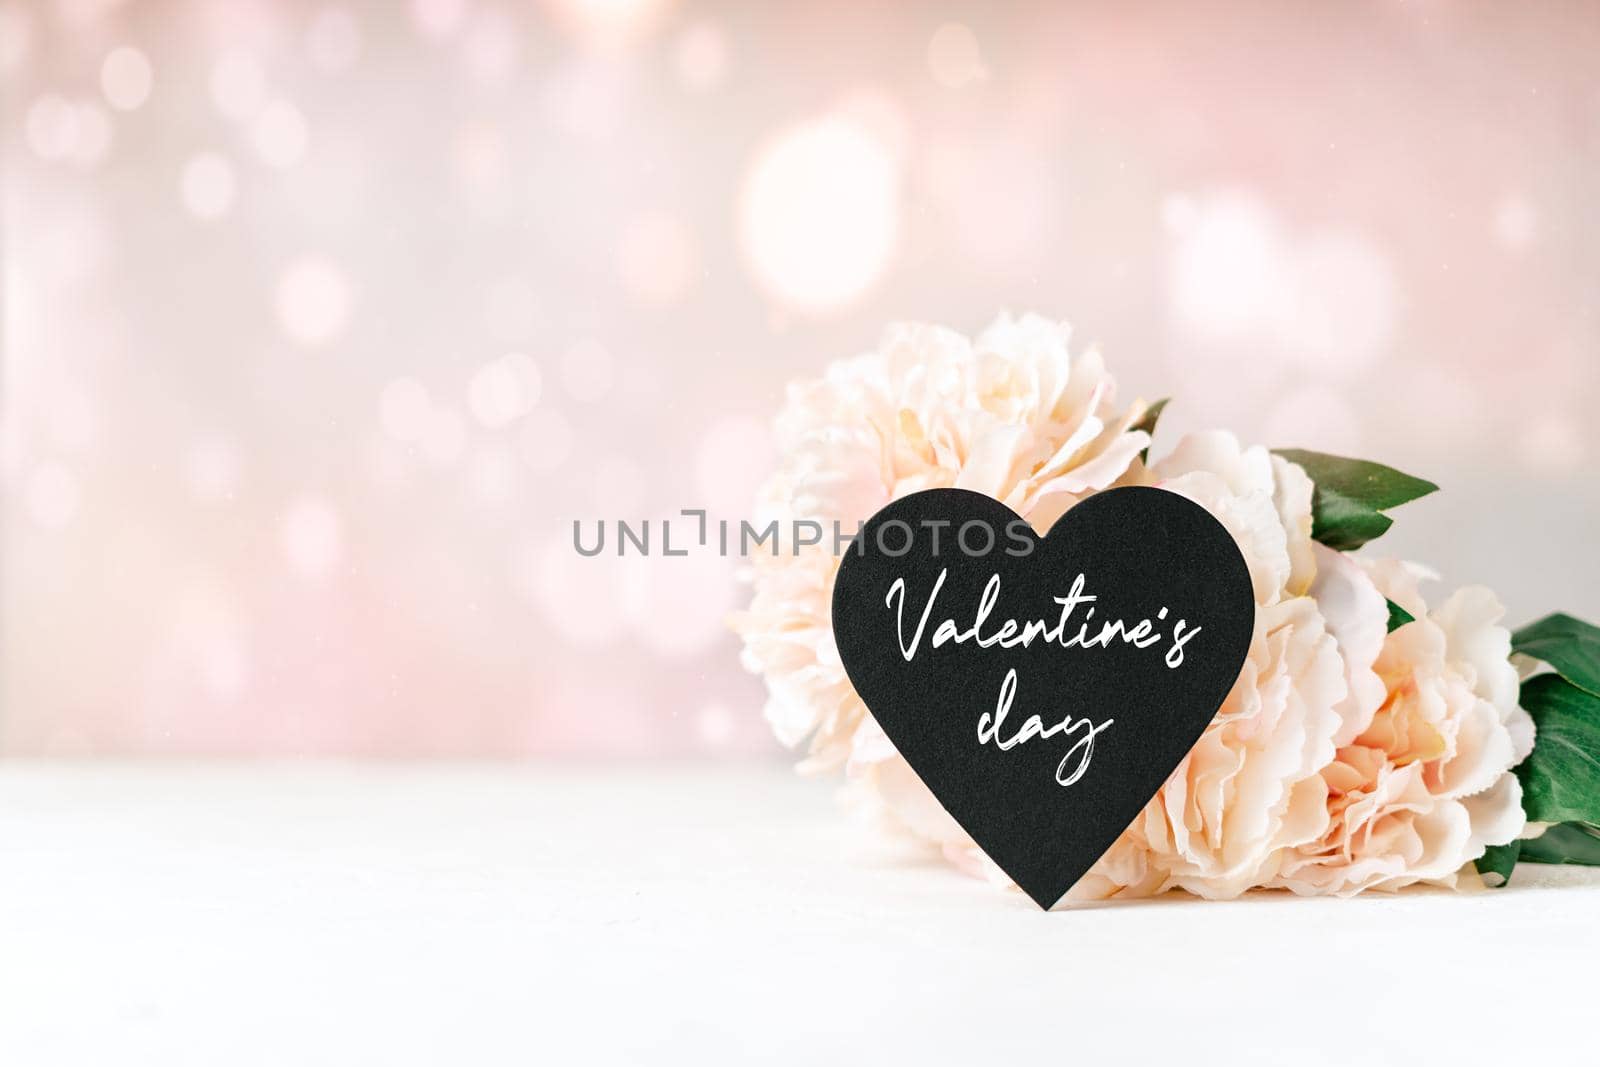 Still life Valentines day text festive background with empty black chalkboard heart and flowers on white table. Mockup banner with copy space for design and glowing bokeh